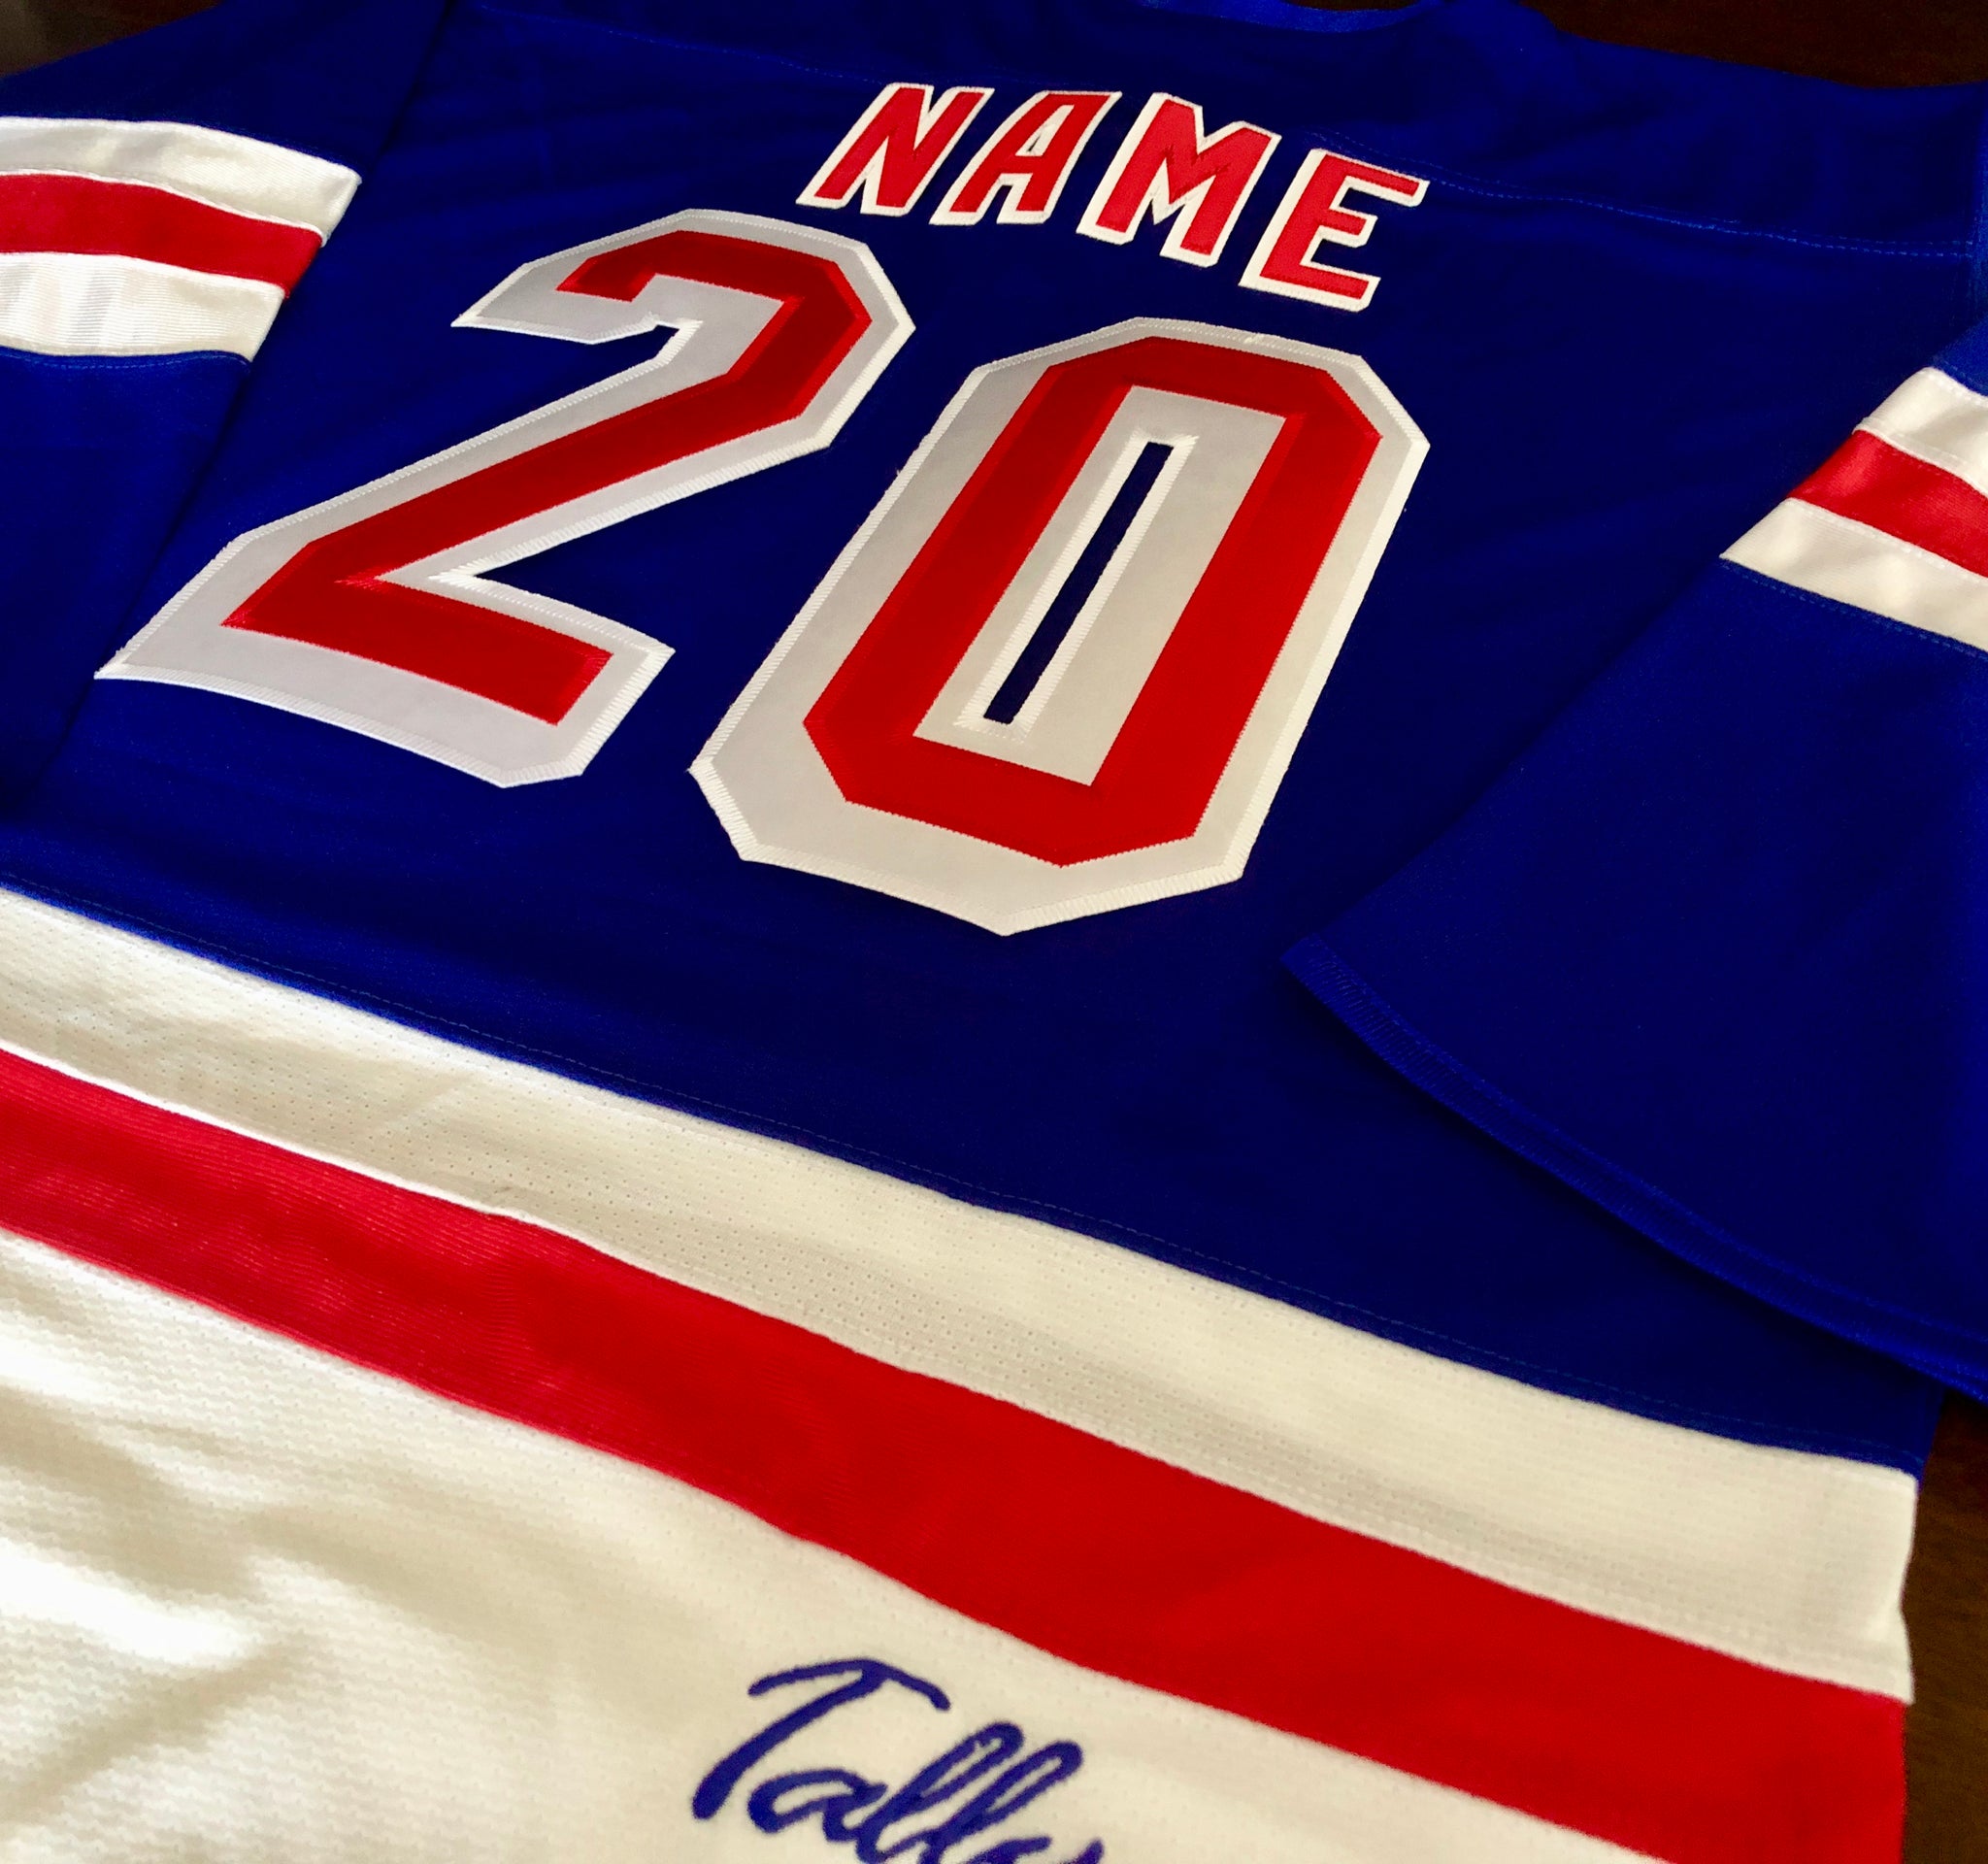 Custom Hockey Jerseys with A Nationals Twill Logo Youth XL / (name and Number on Back and Sleeves) / White